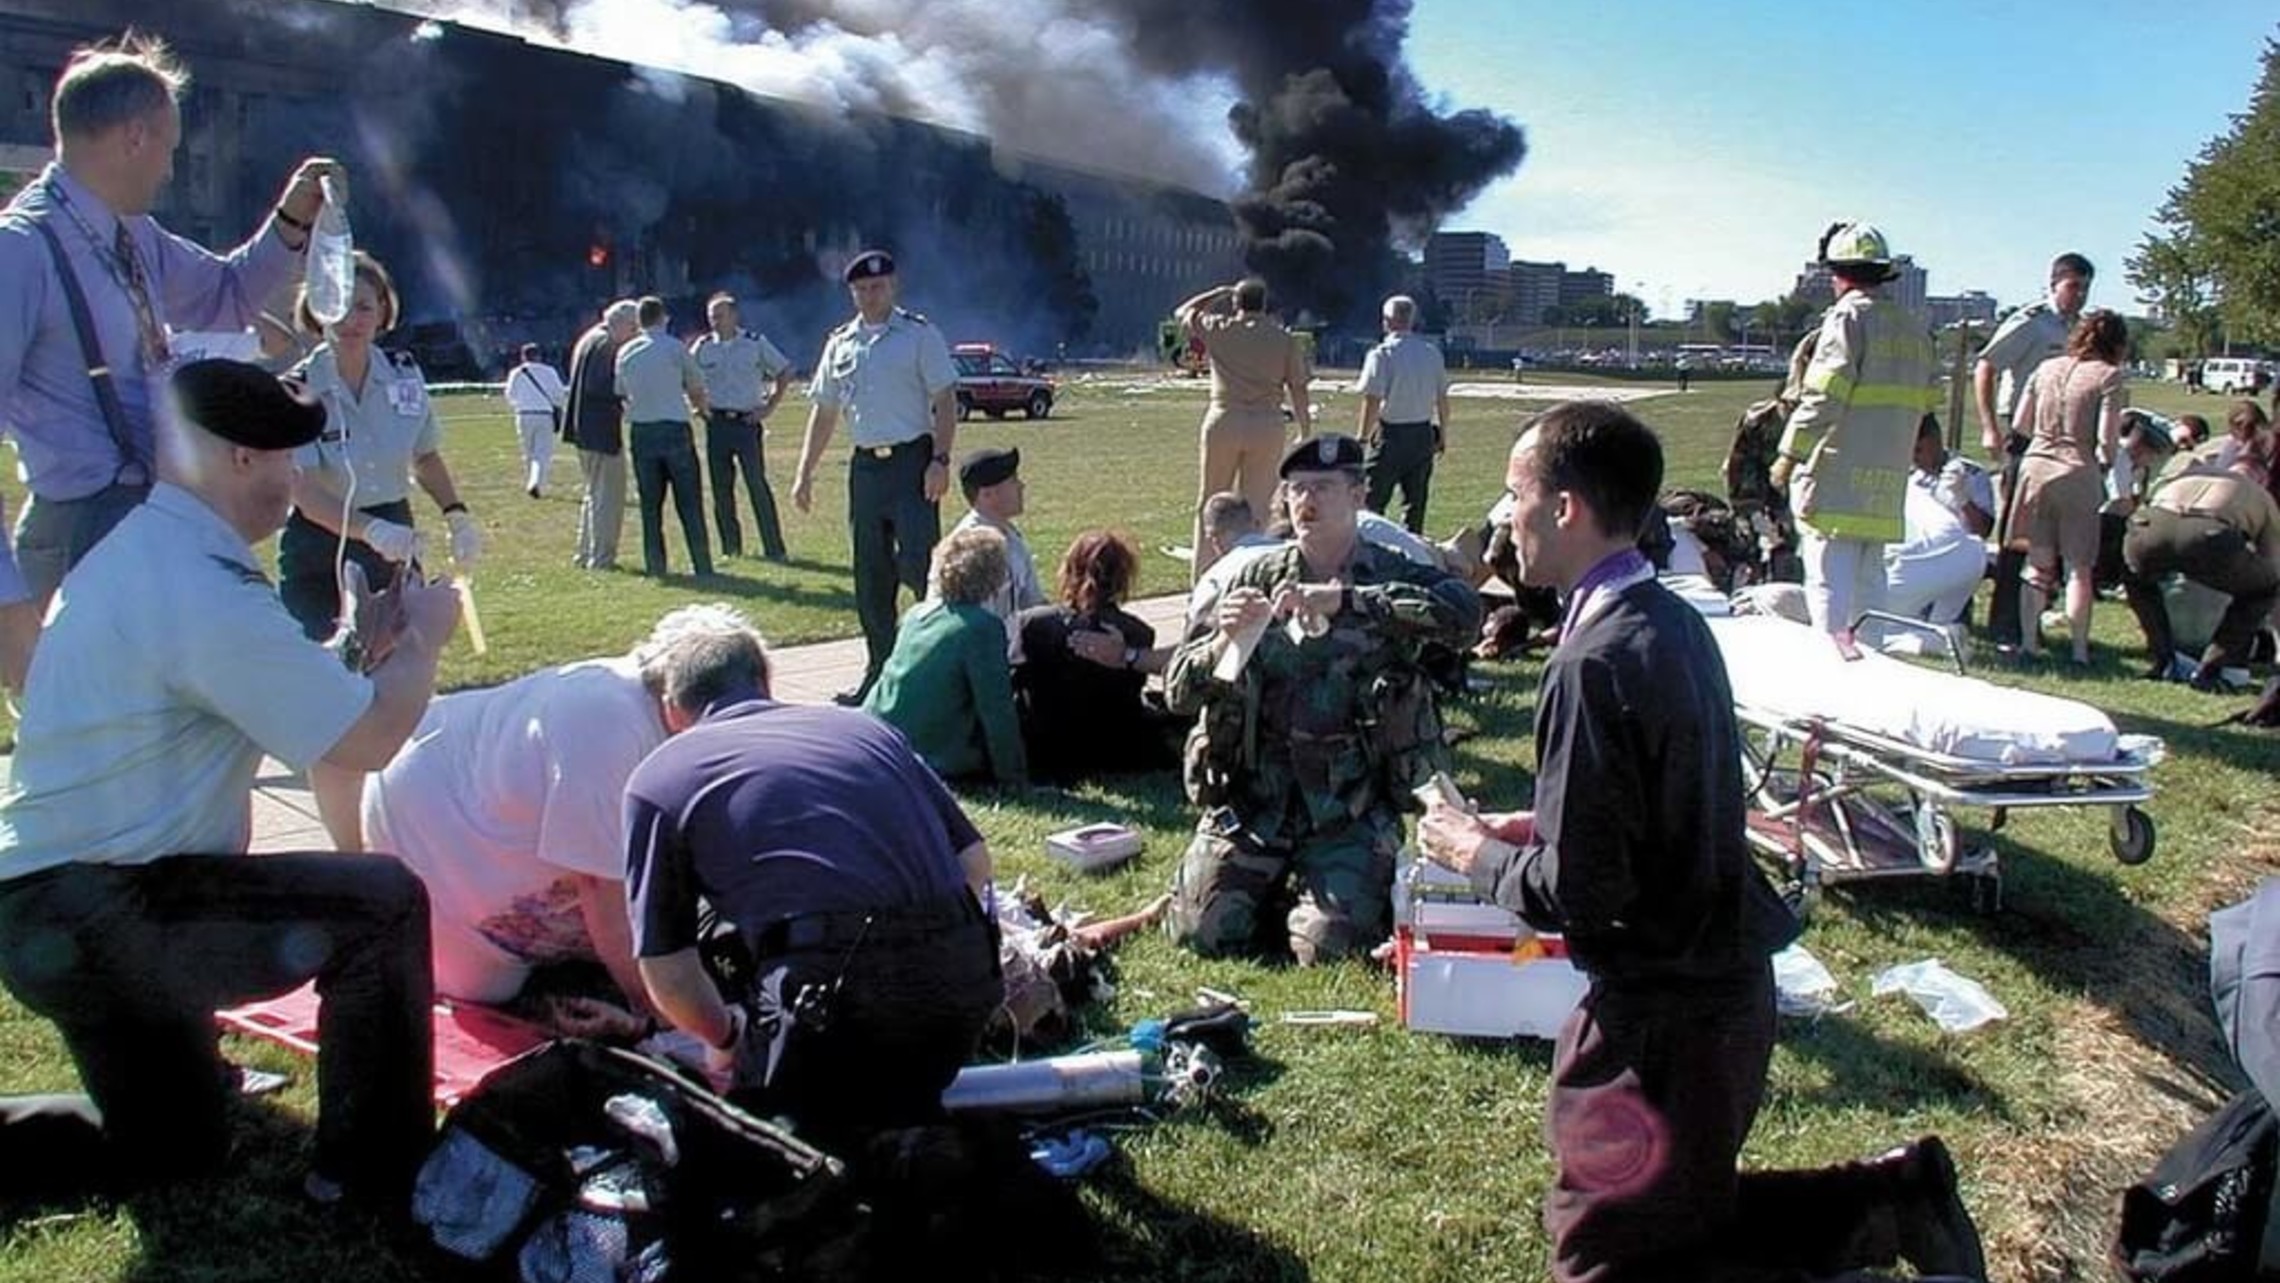 Fr. Steven McGraw prays with victims outsdide the Pentagon on 9/11/2001